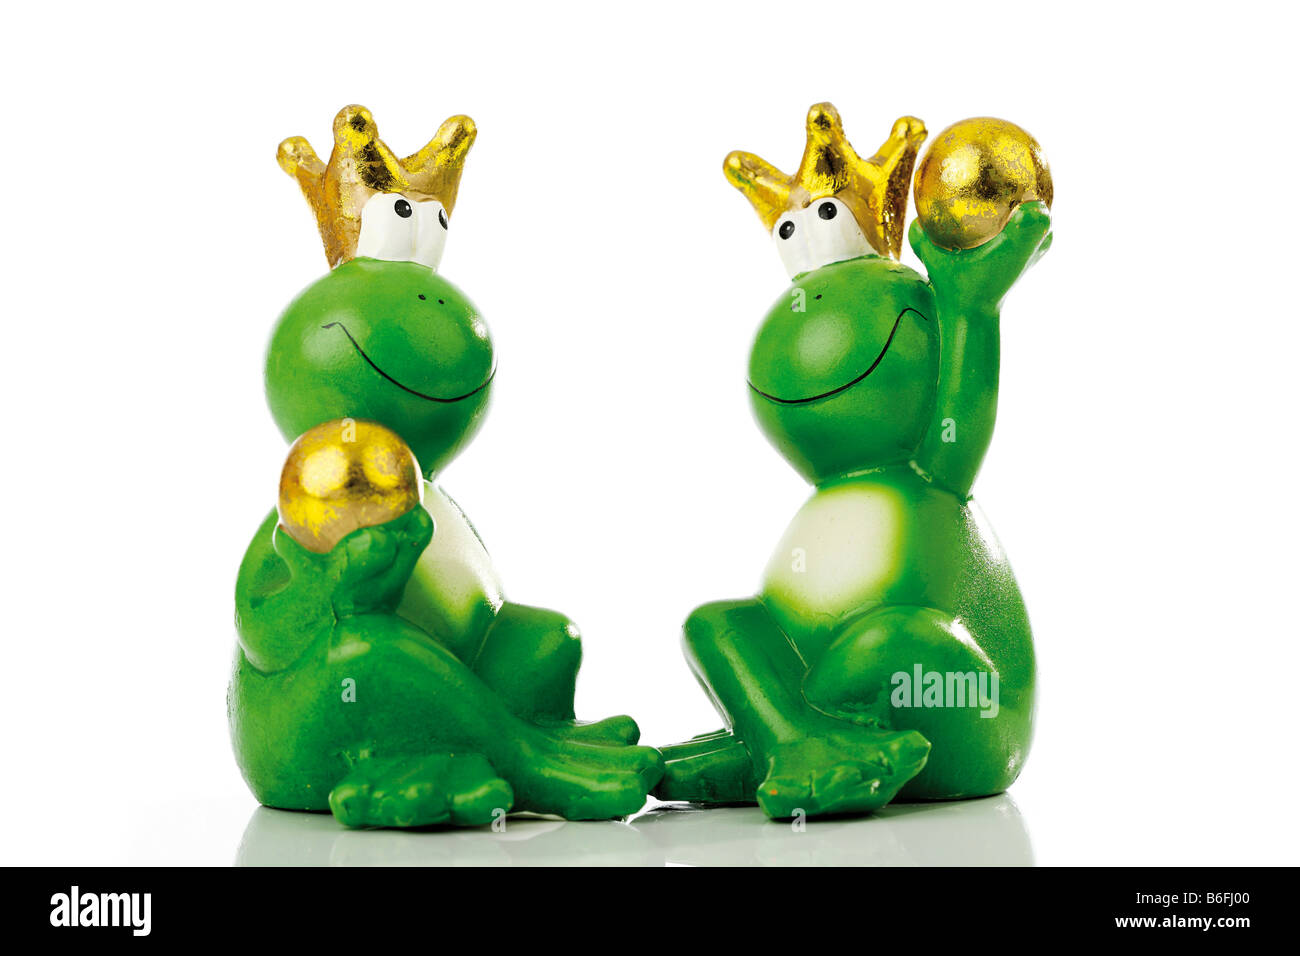 Frog princes or kings each holding a golden ball Stock Photo